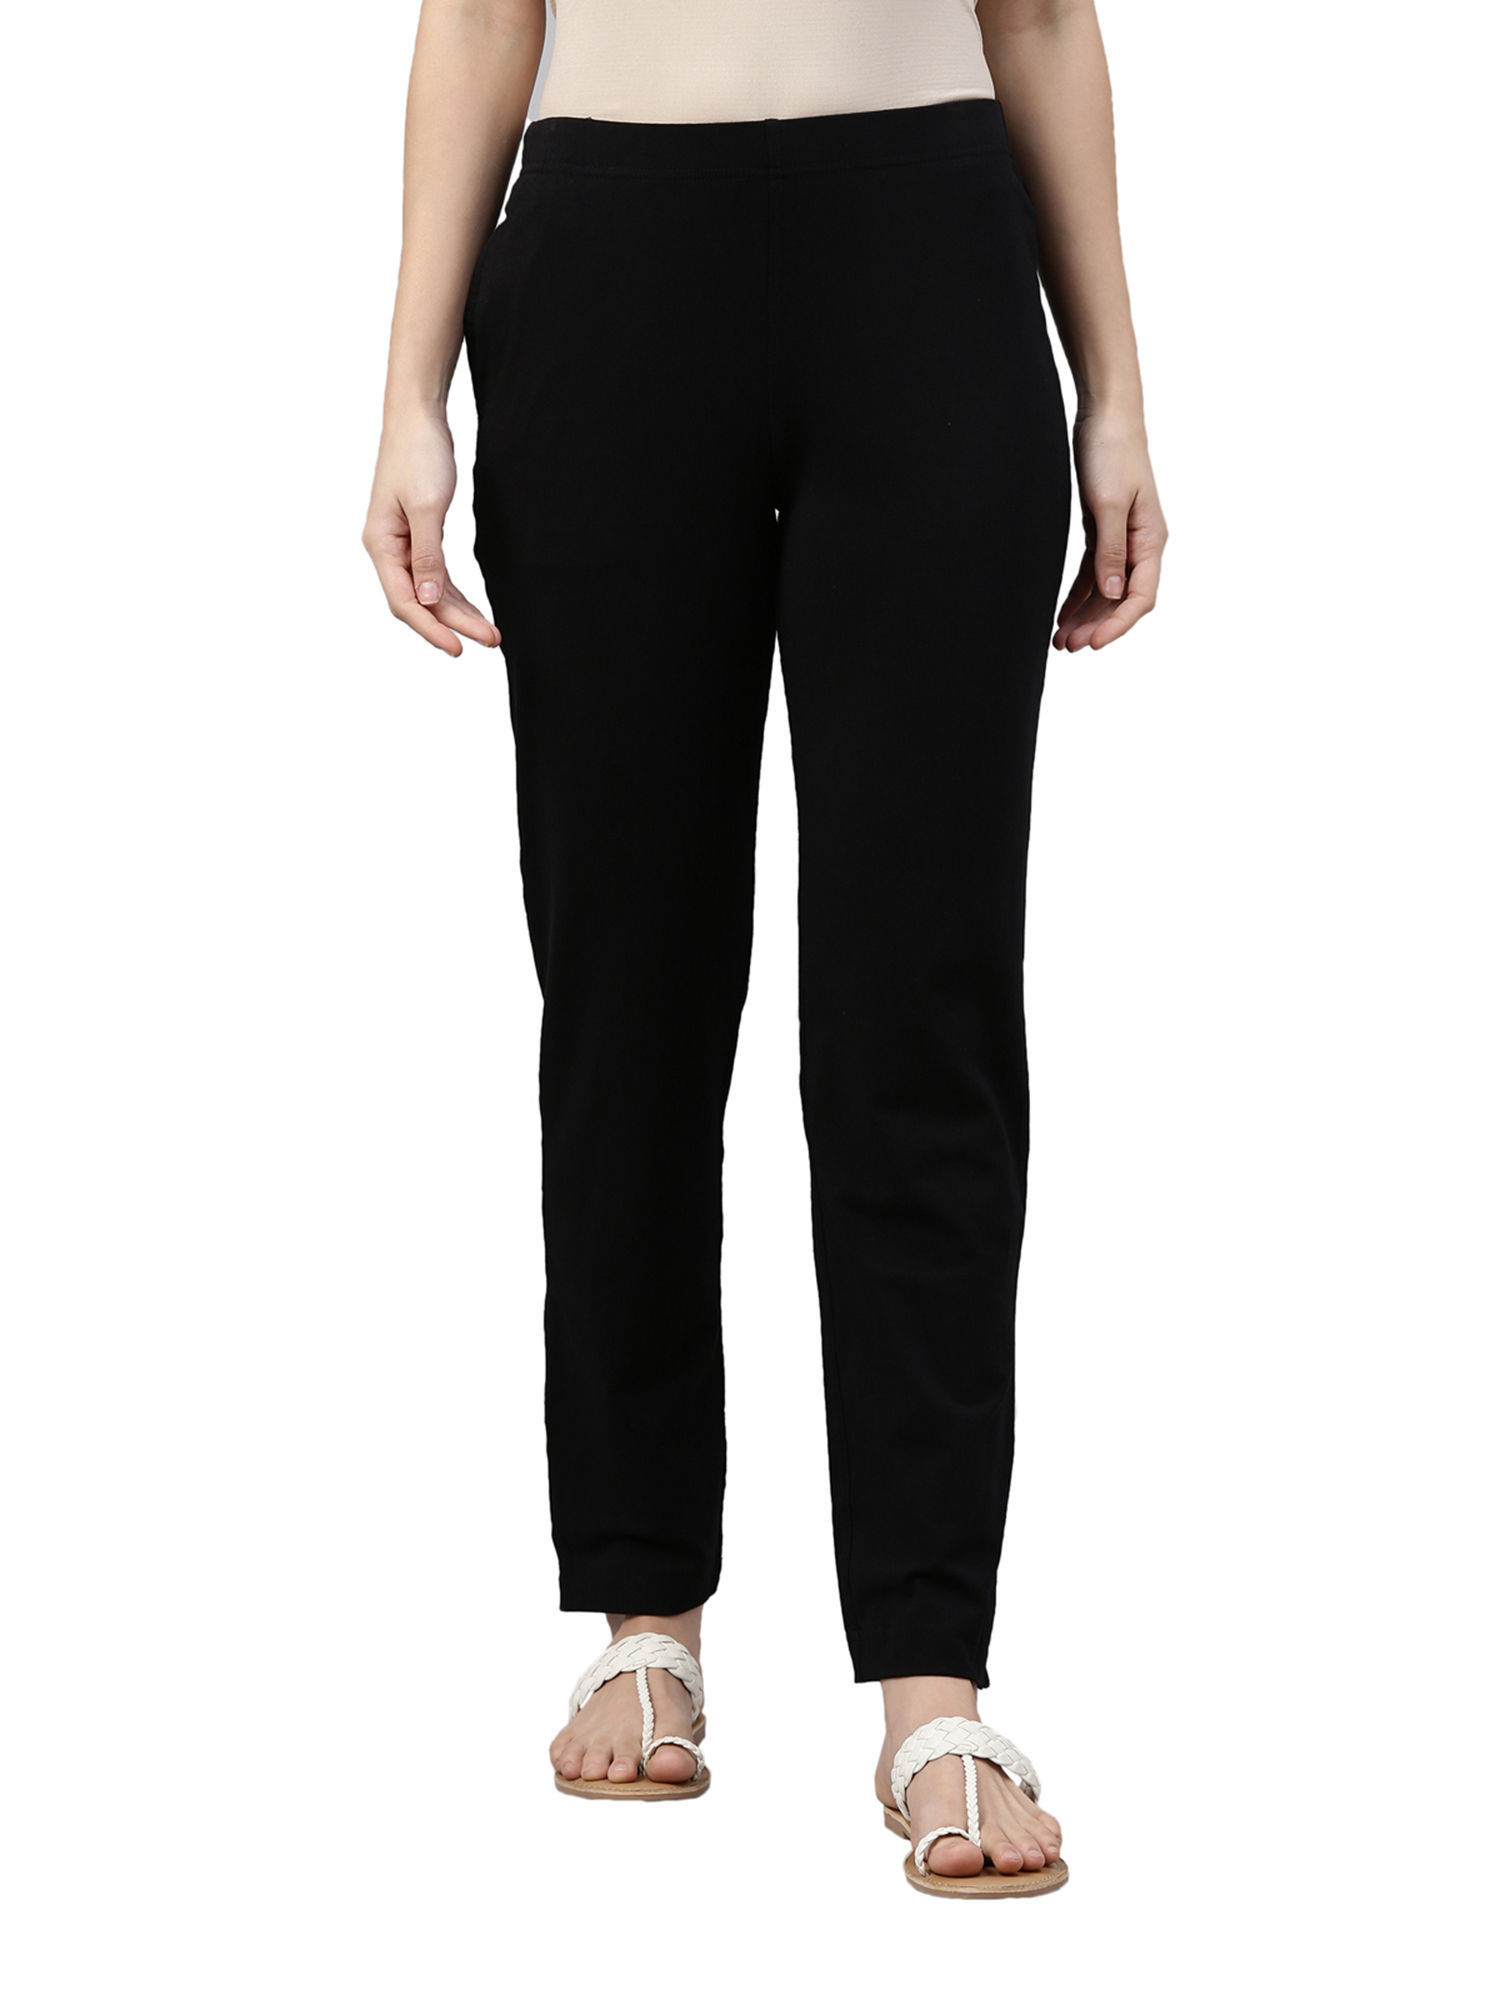 Cotton Lycra Black Trouser For Women's.Ladies Casual Trouser,Track  Pant,Girls stylish Trouser Pant.Elastic Staright Pants, for Casual Office  Work wear.Slim Fit Formal Trousers/Pant.formal Trouser For Womens.Womens  Trousers Cotton Pant.Formal Tousers ...